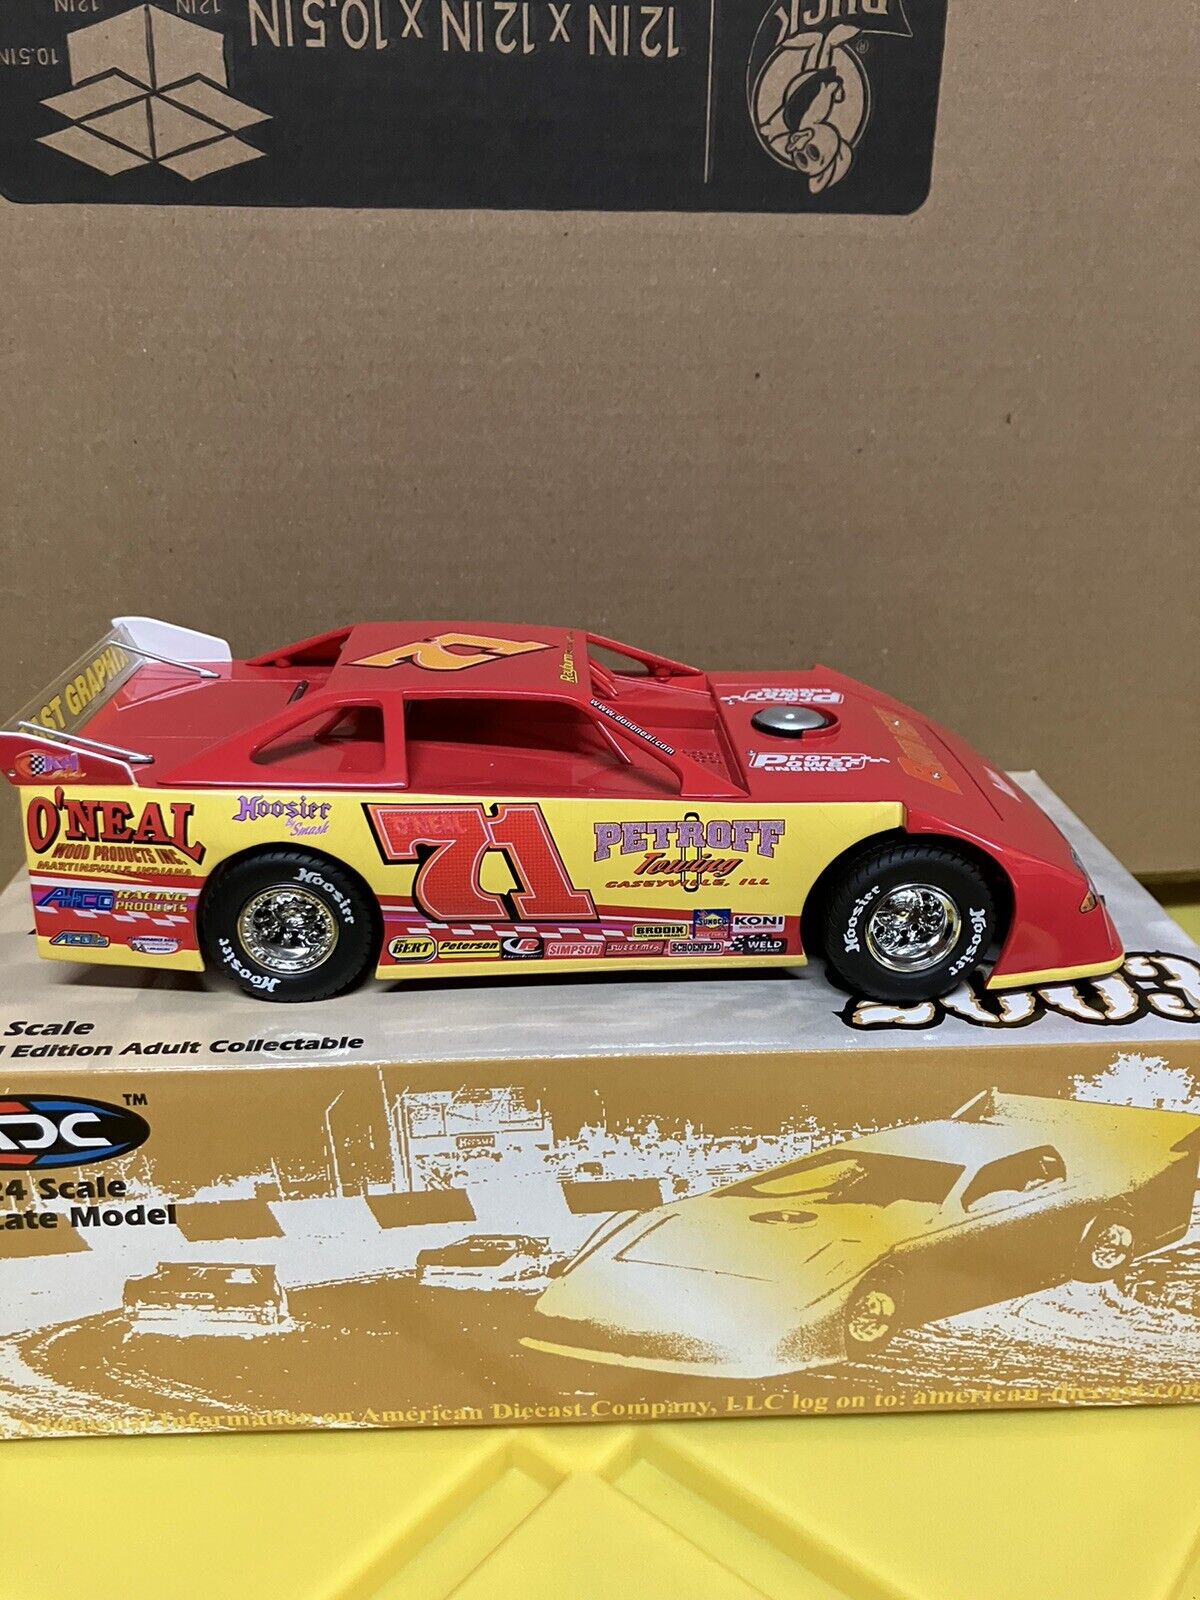 2003 Don O'neal #71 1:24 Scale Adc Dirt Late Model Diecast Car